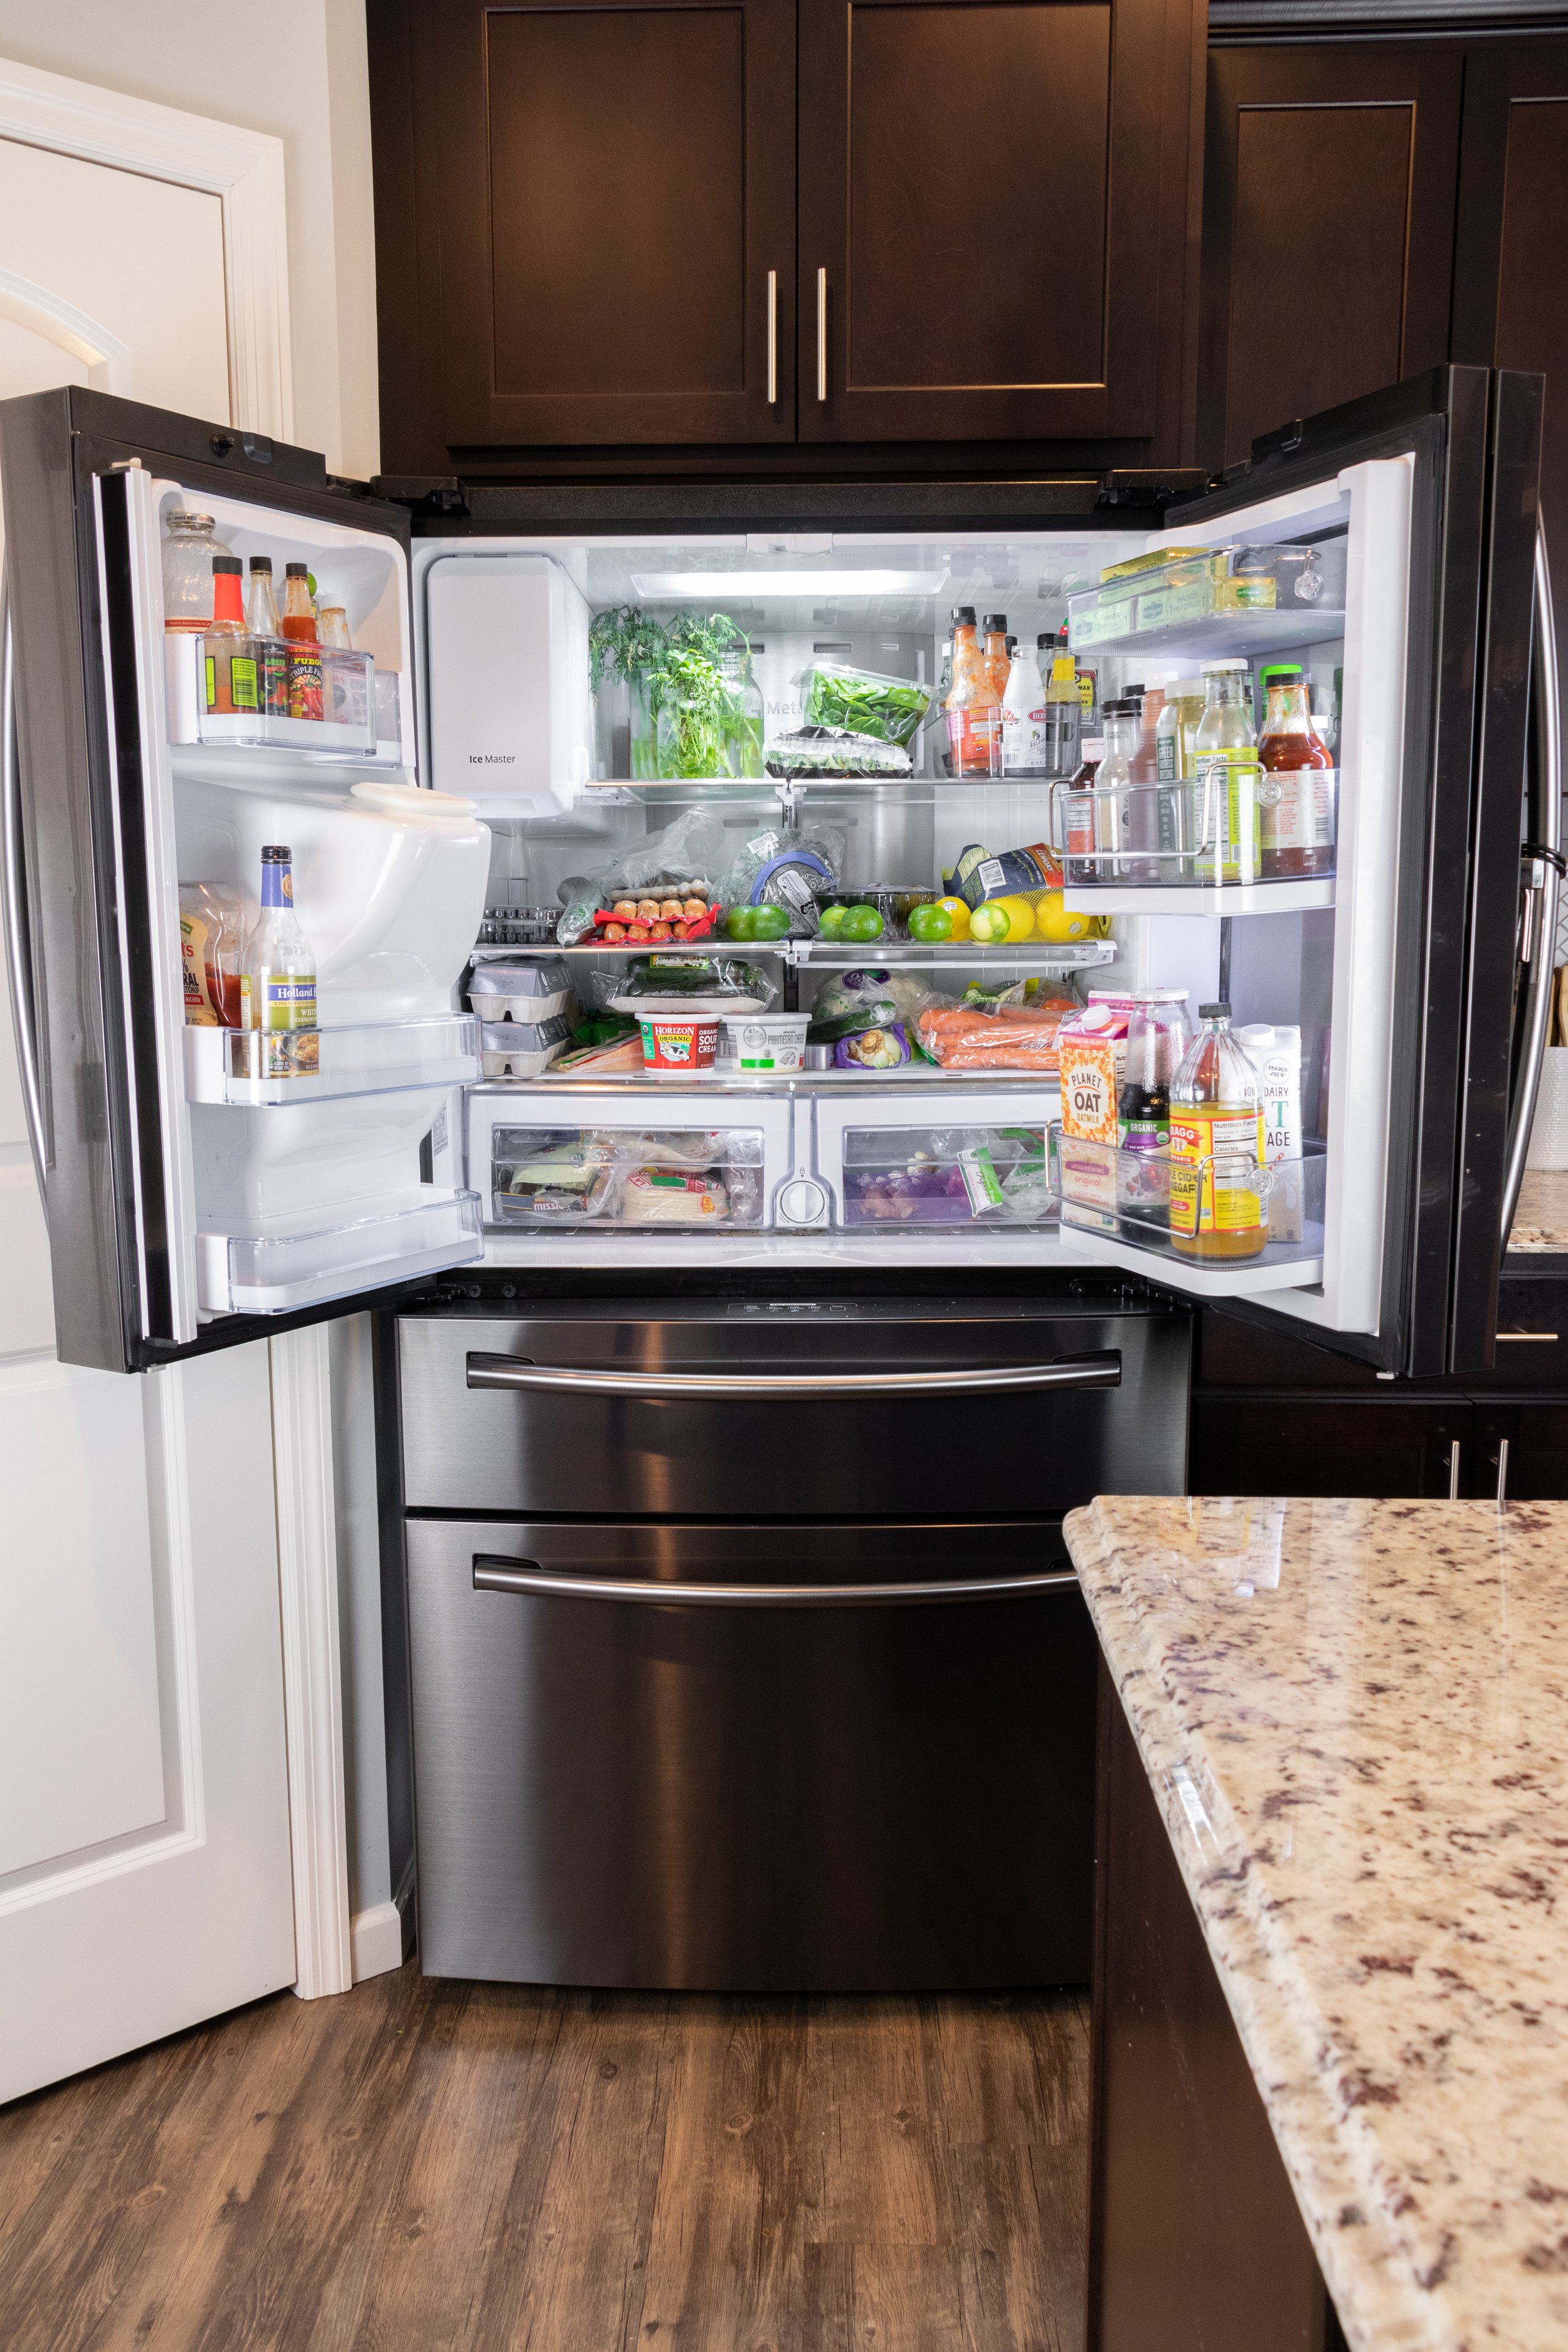 How to organize fridge for healthy eating